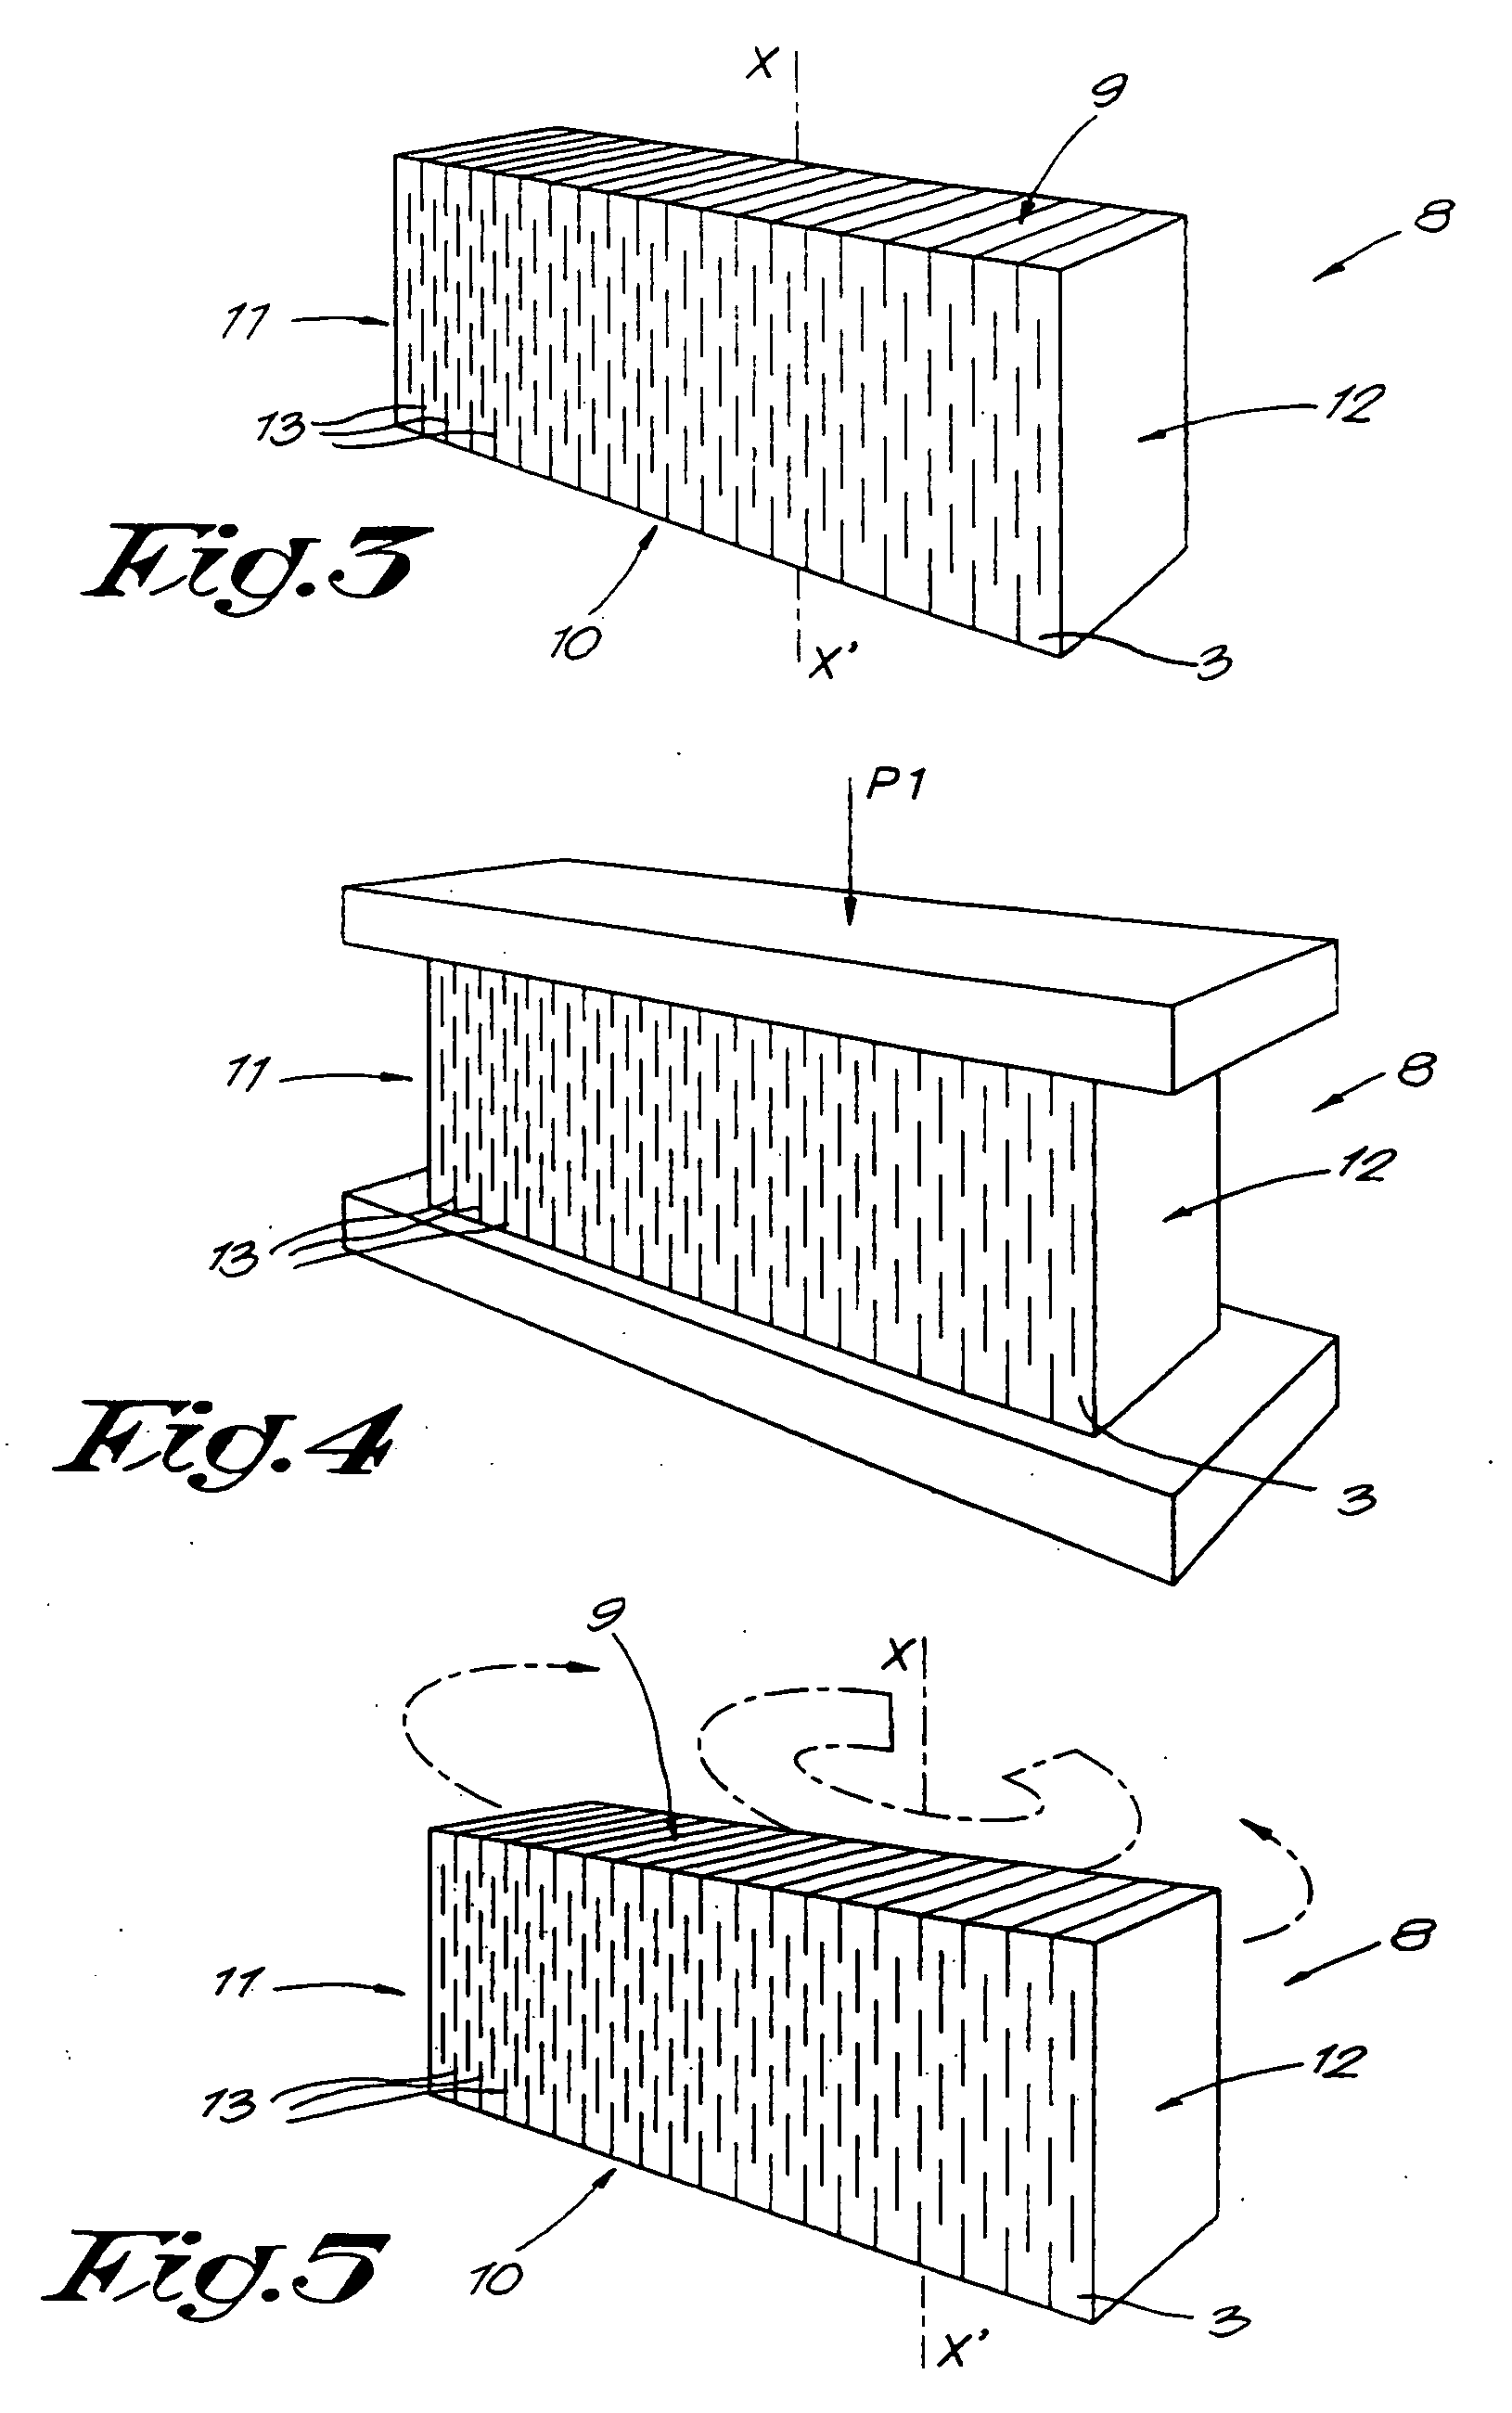 Method for manufacturing a resilient body which can be applied in cushions, mattresses or the like